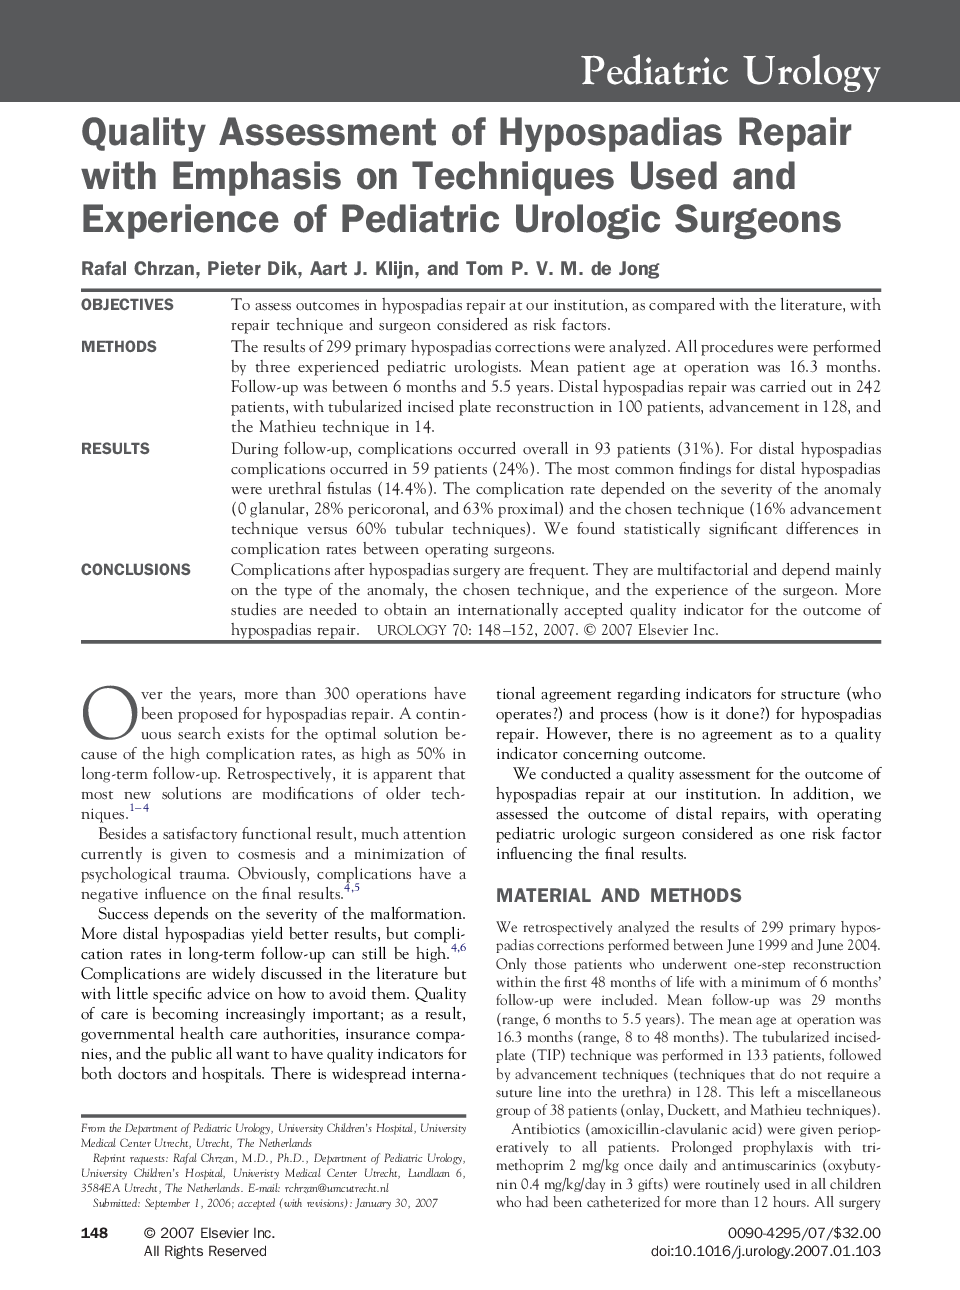 Quality Assessment of Hypospadias Repair with Emphasis on Techniques Used and Experience of Pediatric Urologic Surgeons